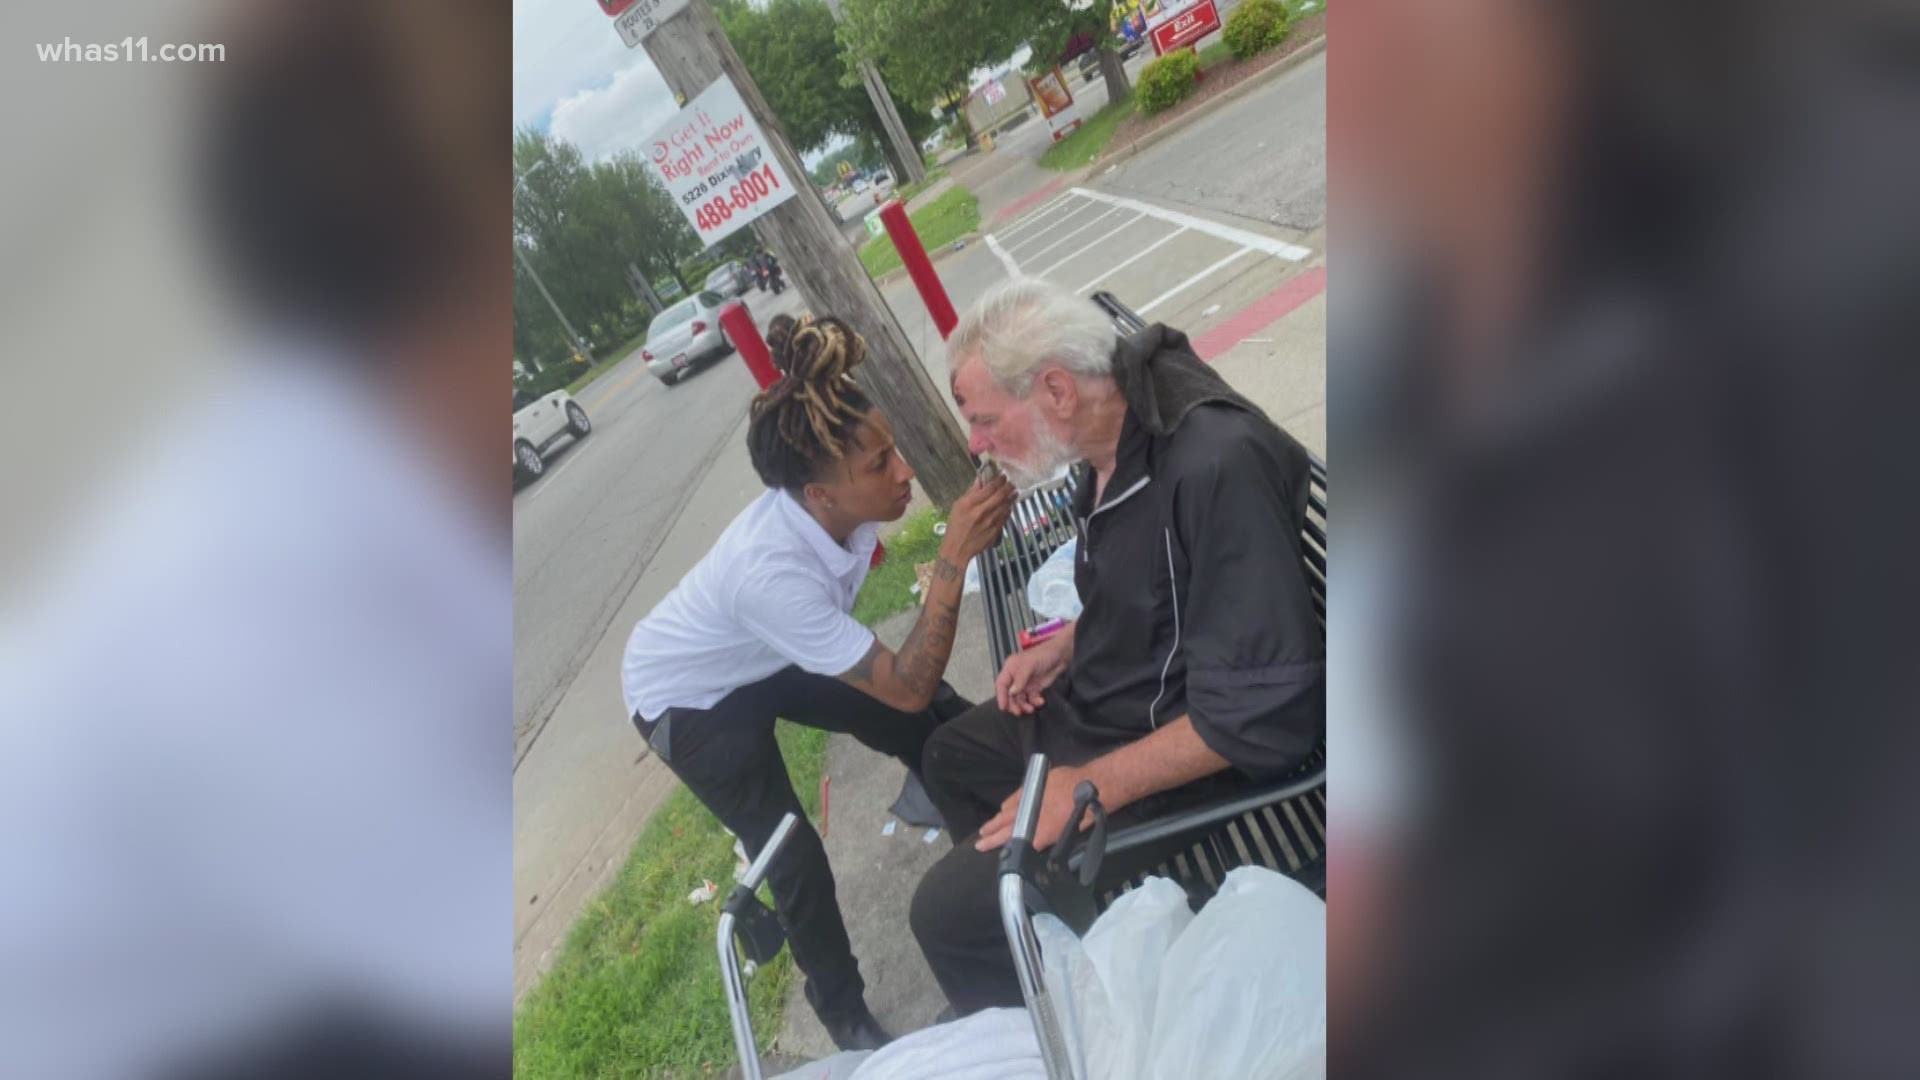 Lex Moran is taking in donations to help those in need after a post about her helping a homeless man, she affectionately calls Joe, went viral.